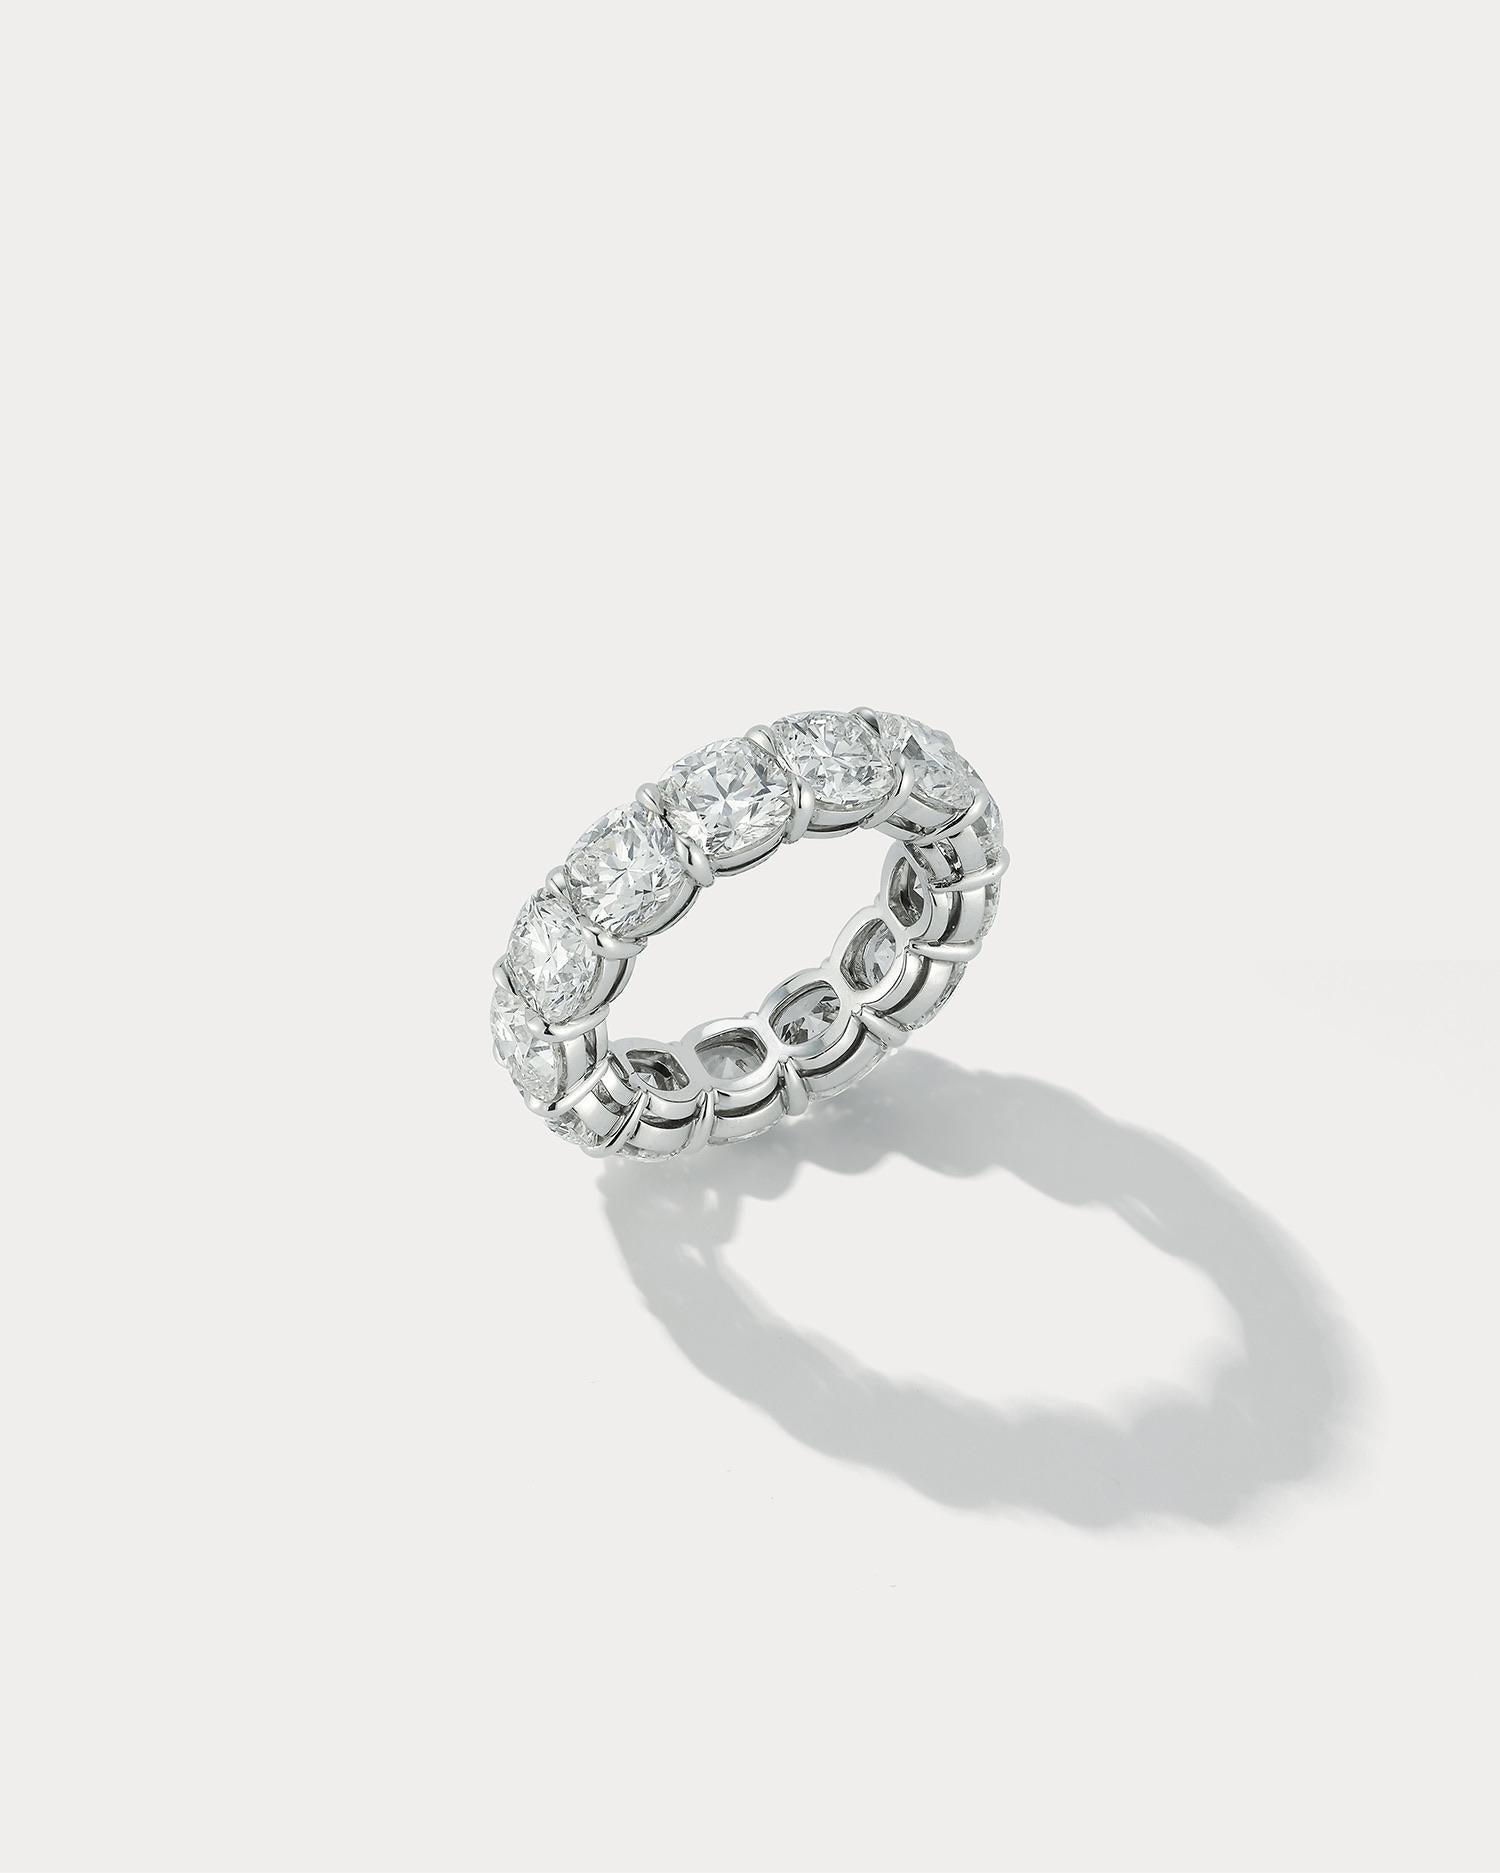 This magnificent 9.47 total carat Cushion Cut Wedding Band is the epitome of timeless elegance. Handmade by a skilled artisan, this ring is a unique and beautiful symbol of your love. The cushion cut stone, with its rounded edges and square or